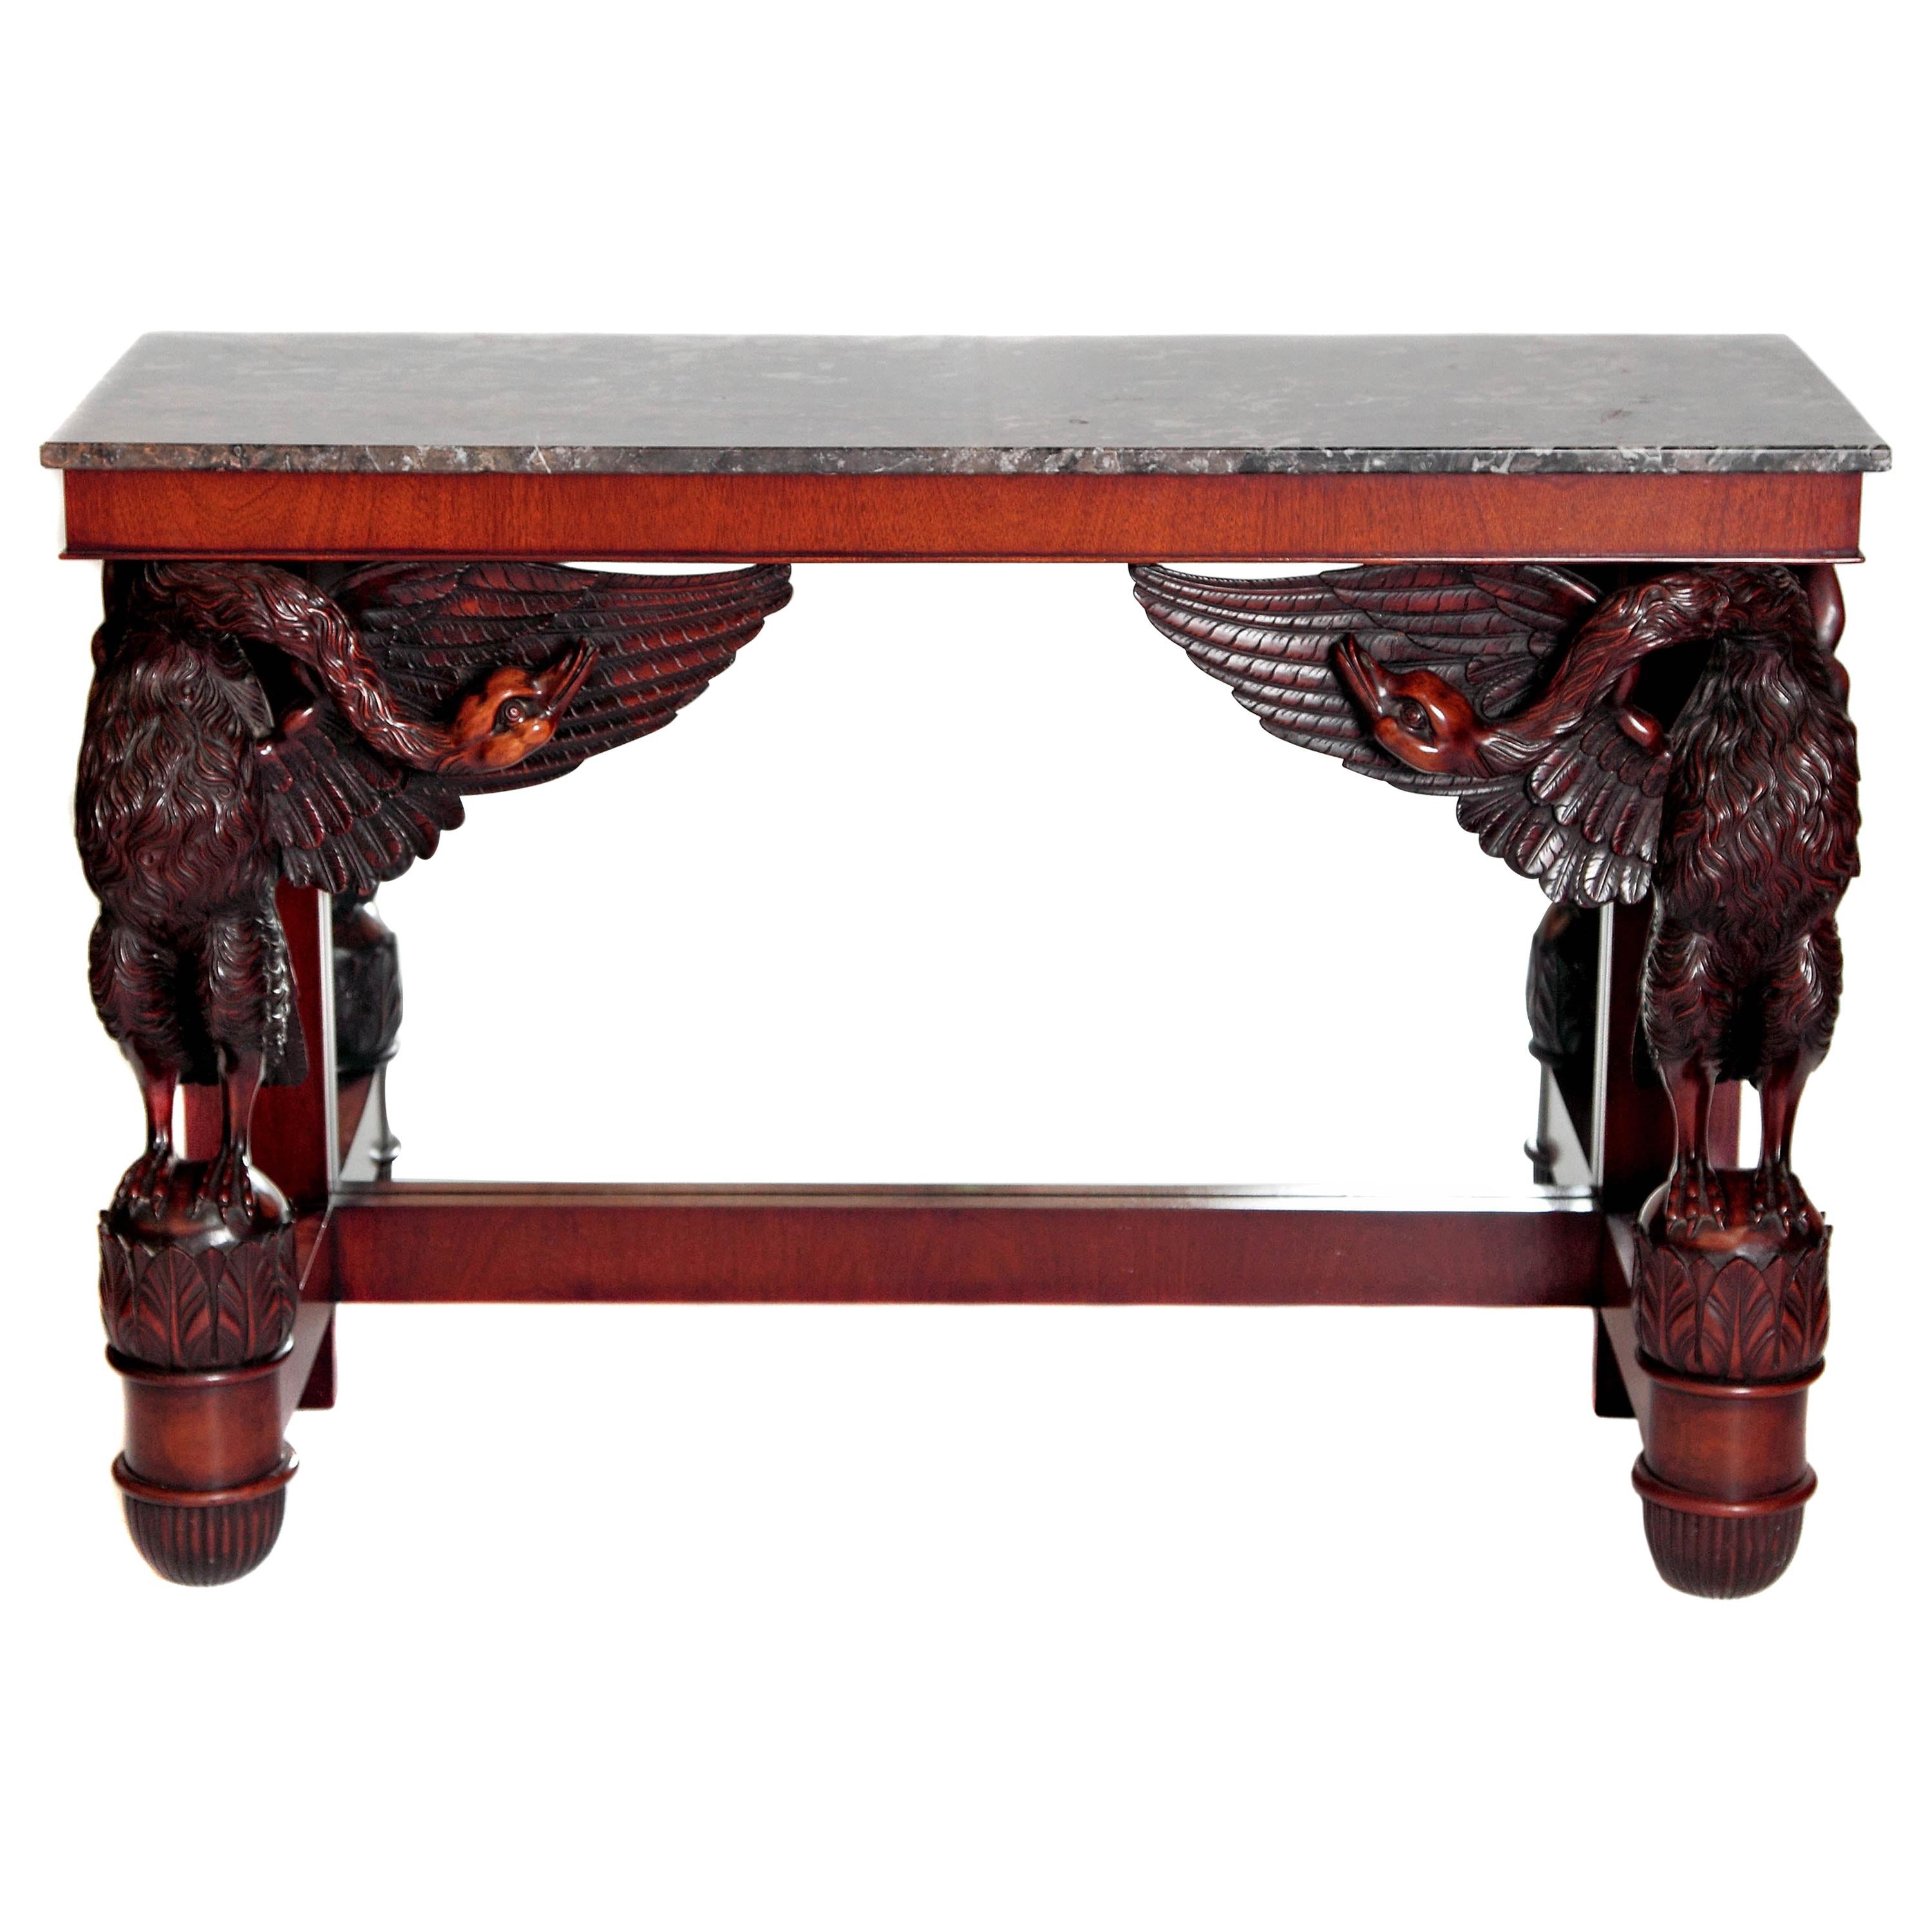 Early 19th Century French Pier Table with Grey Marble Top